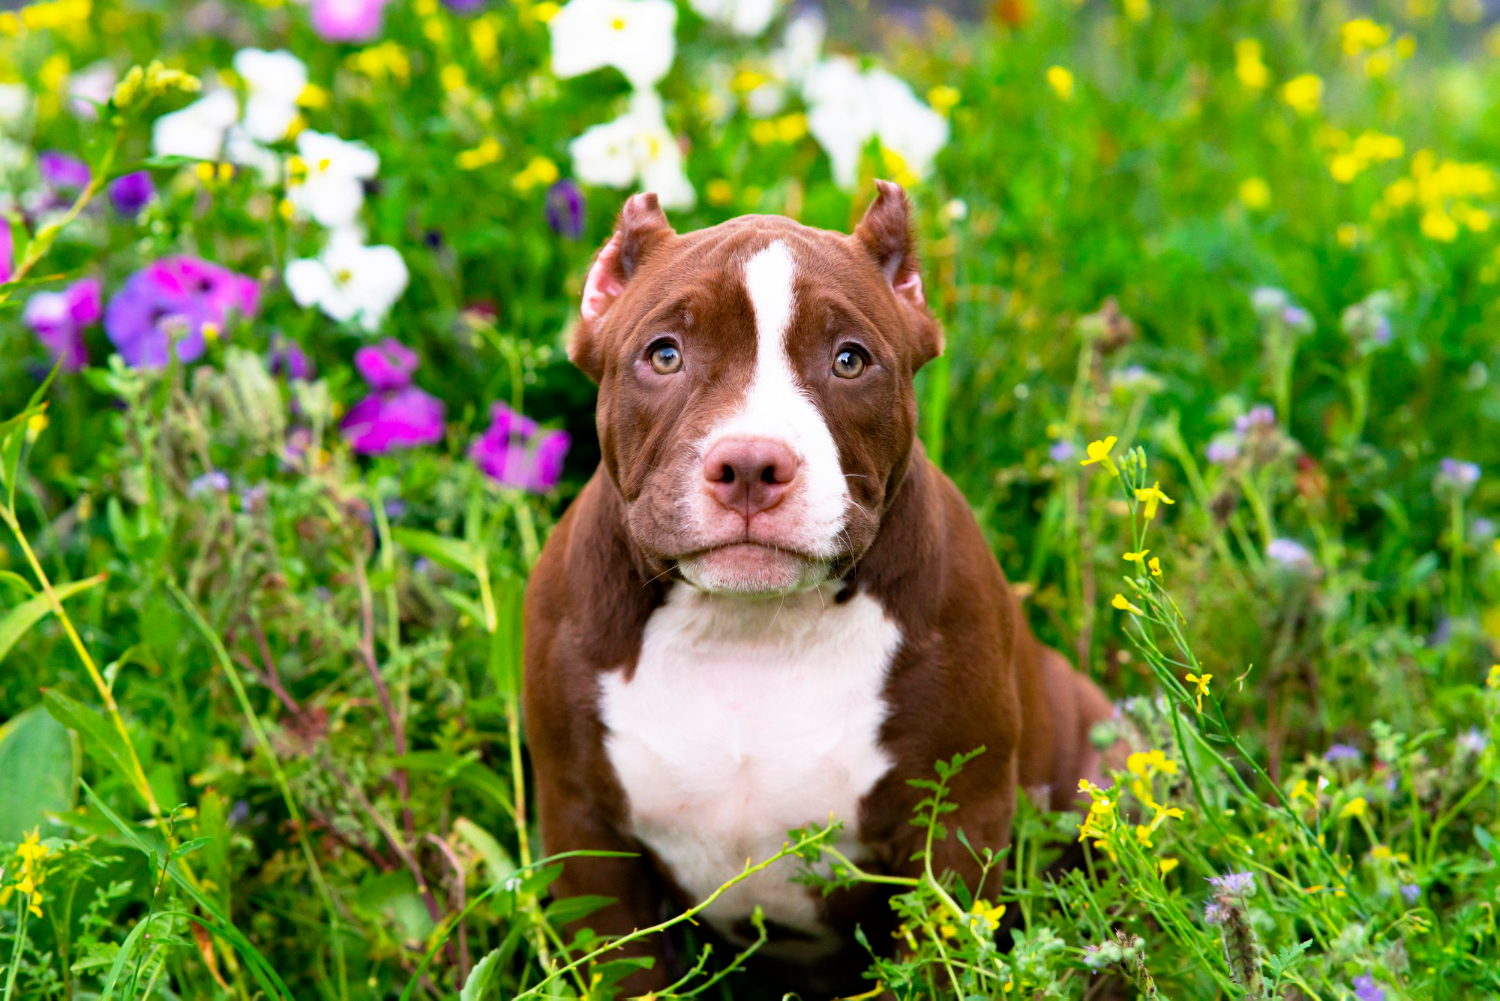 Which ones to choose home insurance for pitbull owners?